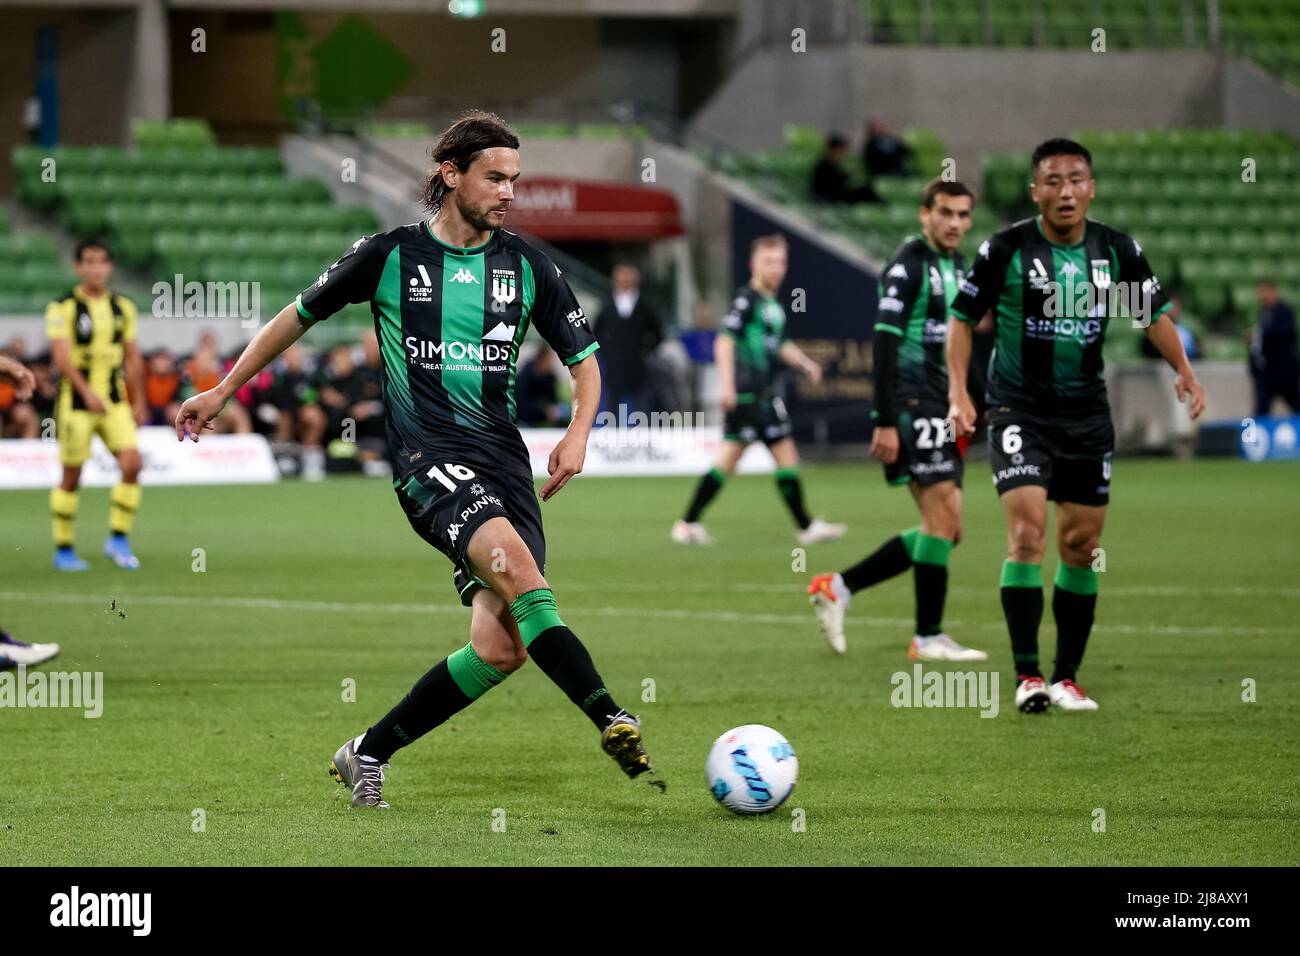 Melbourne, Australia, 14 May, 2022. Rene Krhin of Western United controls the ball during the A-League Elimination Final soccer match between Western United and Wellington Phoenix at AAMI Park on May 14, 2022 in Melbourne, Australia. Credit: Dave Hewison/Speed Media/Alamy Live News Stock Photo